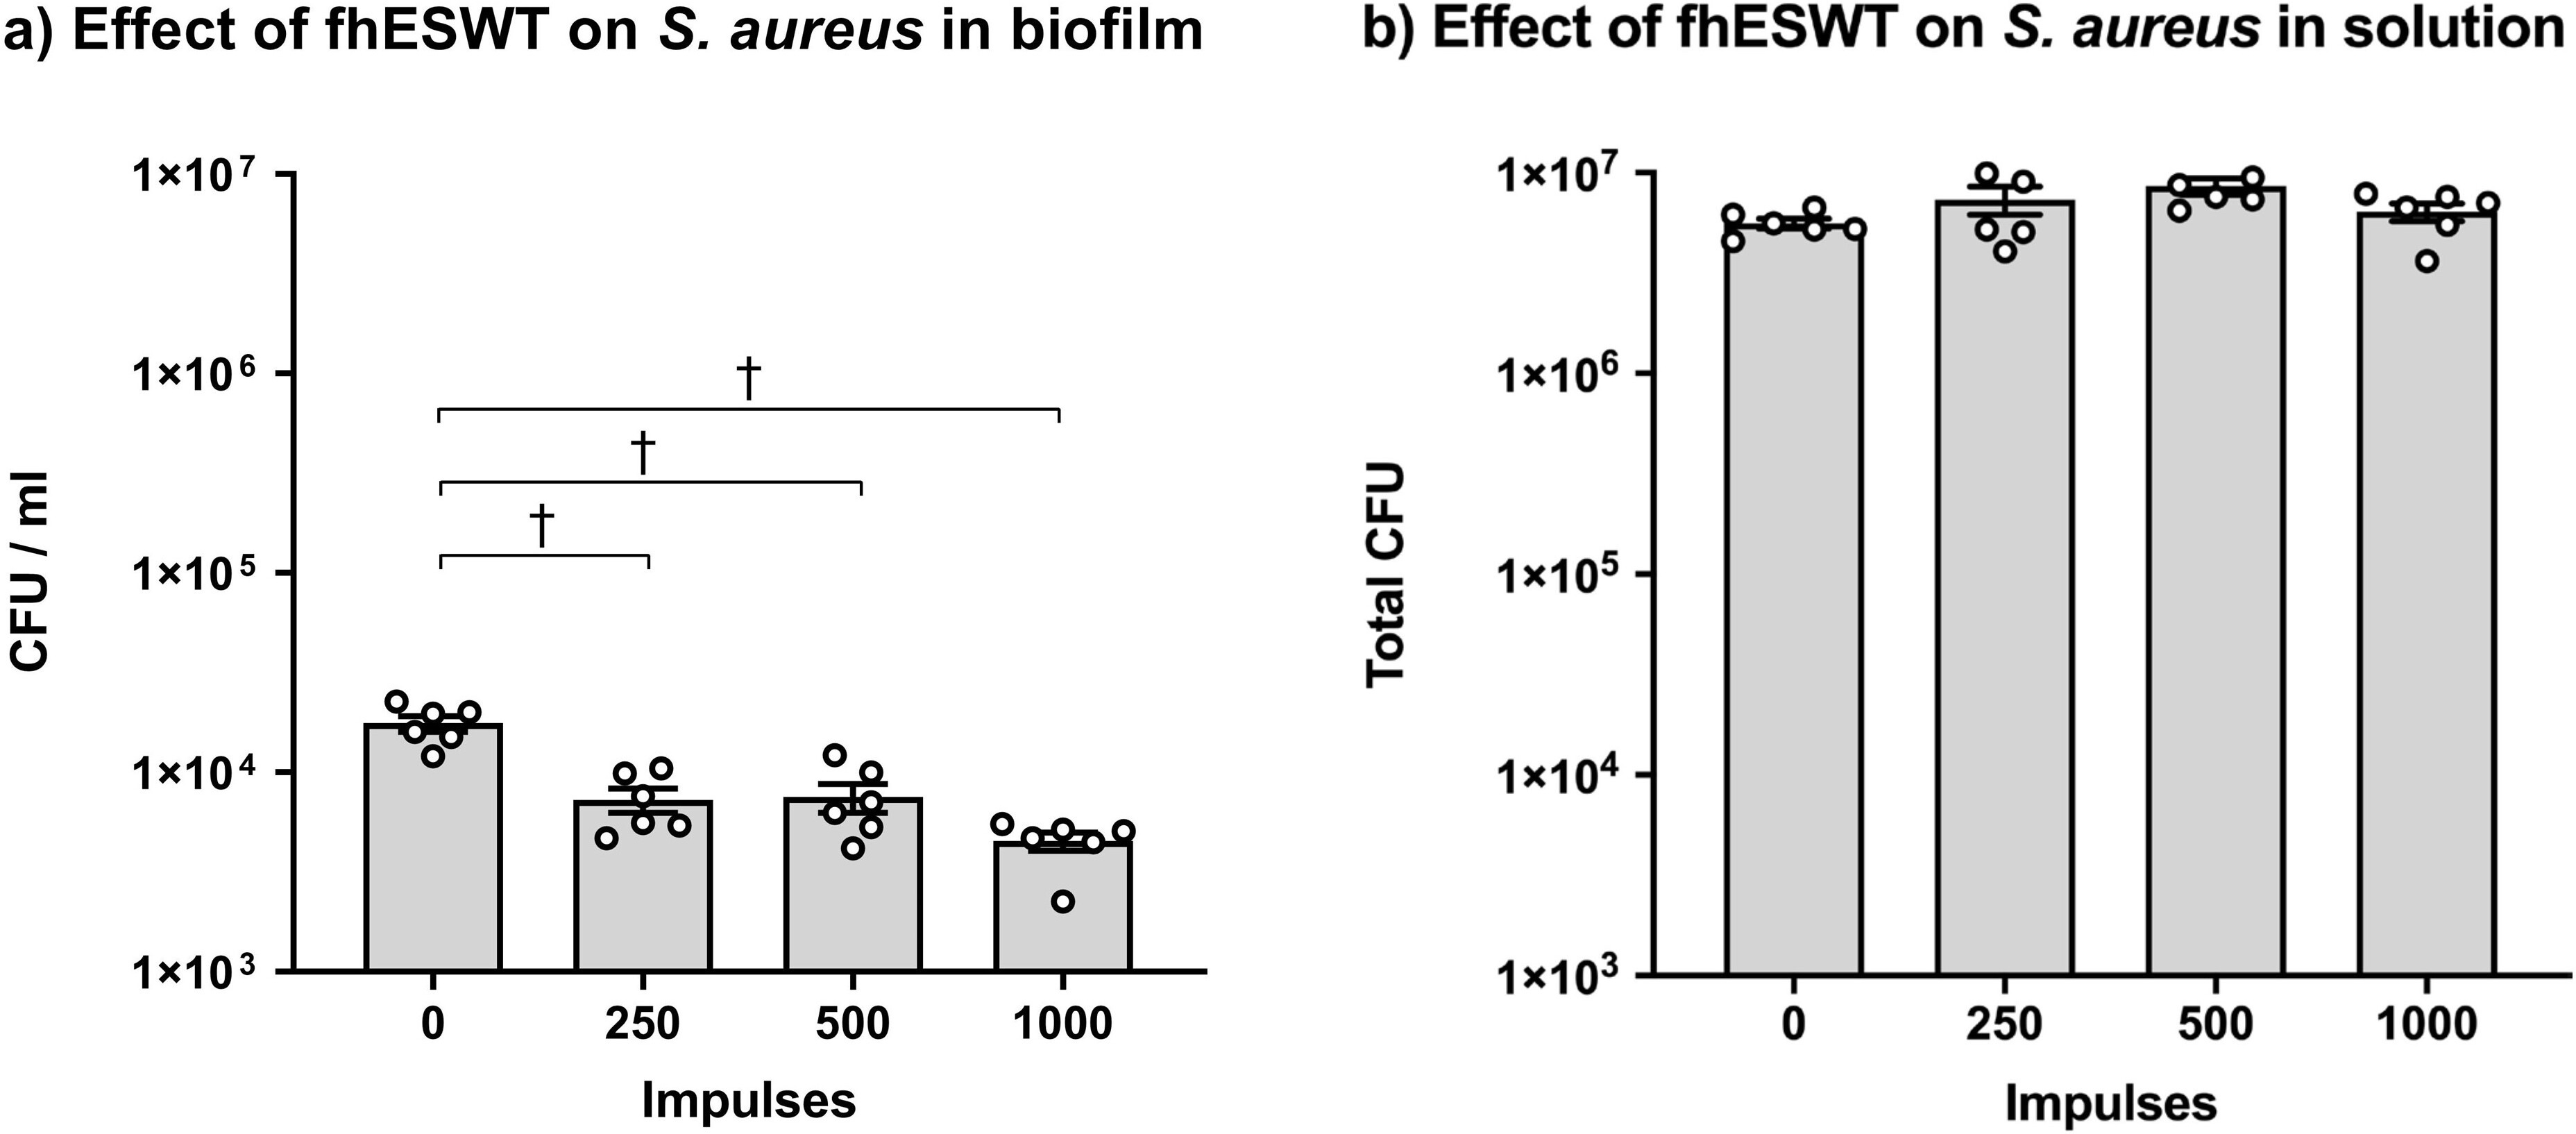 Fig. 1 
            Dose-dependent effect of focused high-energy extracorporeal shockwave therapy (fhESWT). a) Effect of different impulse numbers of fhESWT on Staphylococcus aureus colony-forming units (CFUs) in biofilm grown on titanium discs. b) Effect of different impulse numbers of fhESWT on S. aureus in the surrounding fluid of the plastic bag. N = 6 per group, significant difference compared to zero impulses (*p < 0.05; †p < 0.001, all ordinary one-way analysis of variance (ANOVA) followed by Tukey's range test), mean and standard error of the mean (SEM).
          